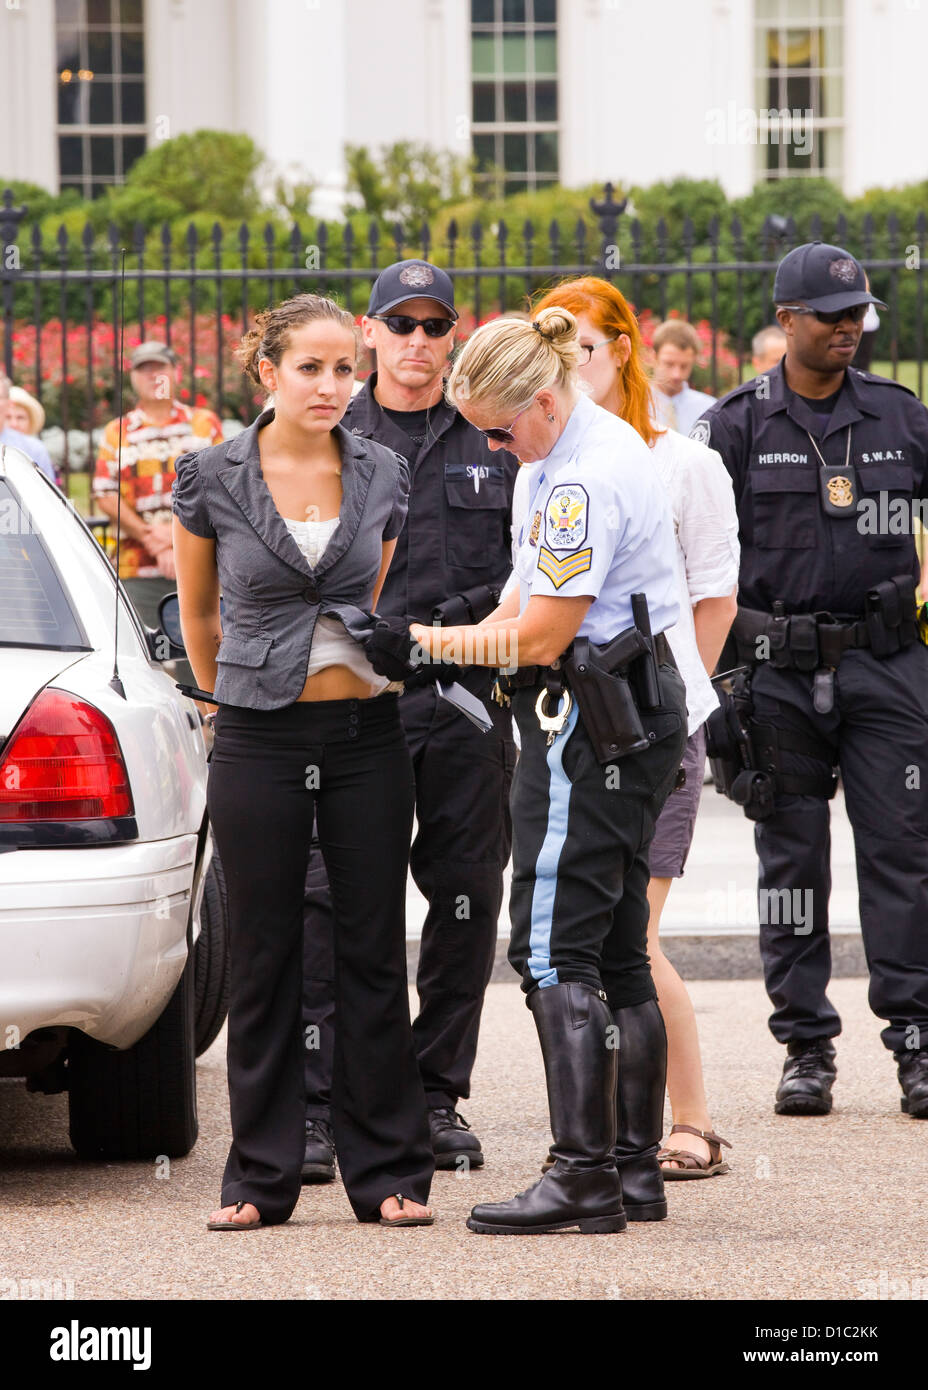 Woman Under Arrest And Being Searched By Police At A Public Protest Washington Dc Usa Stock